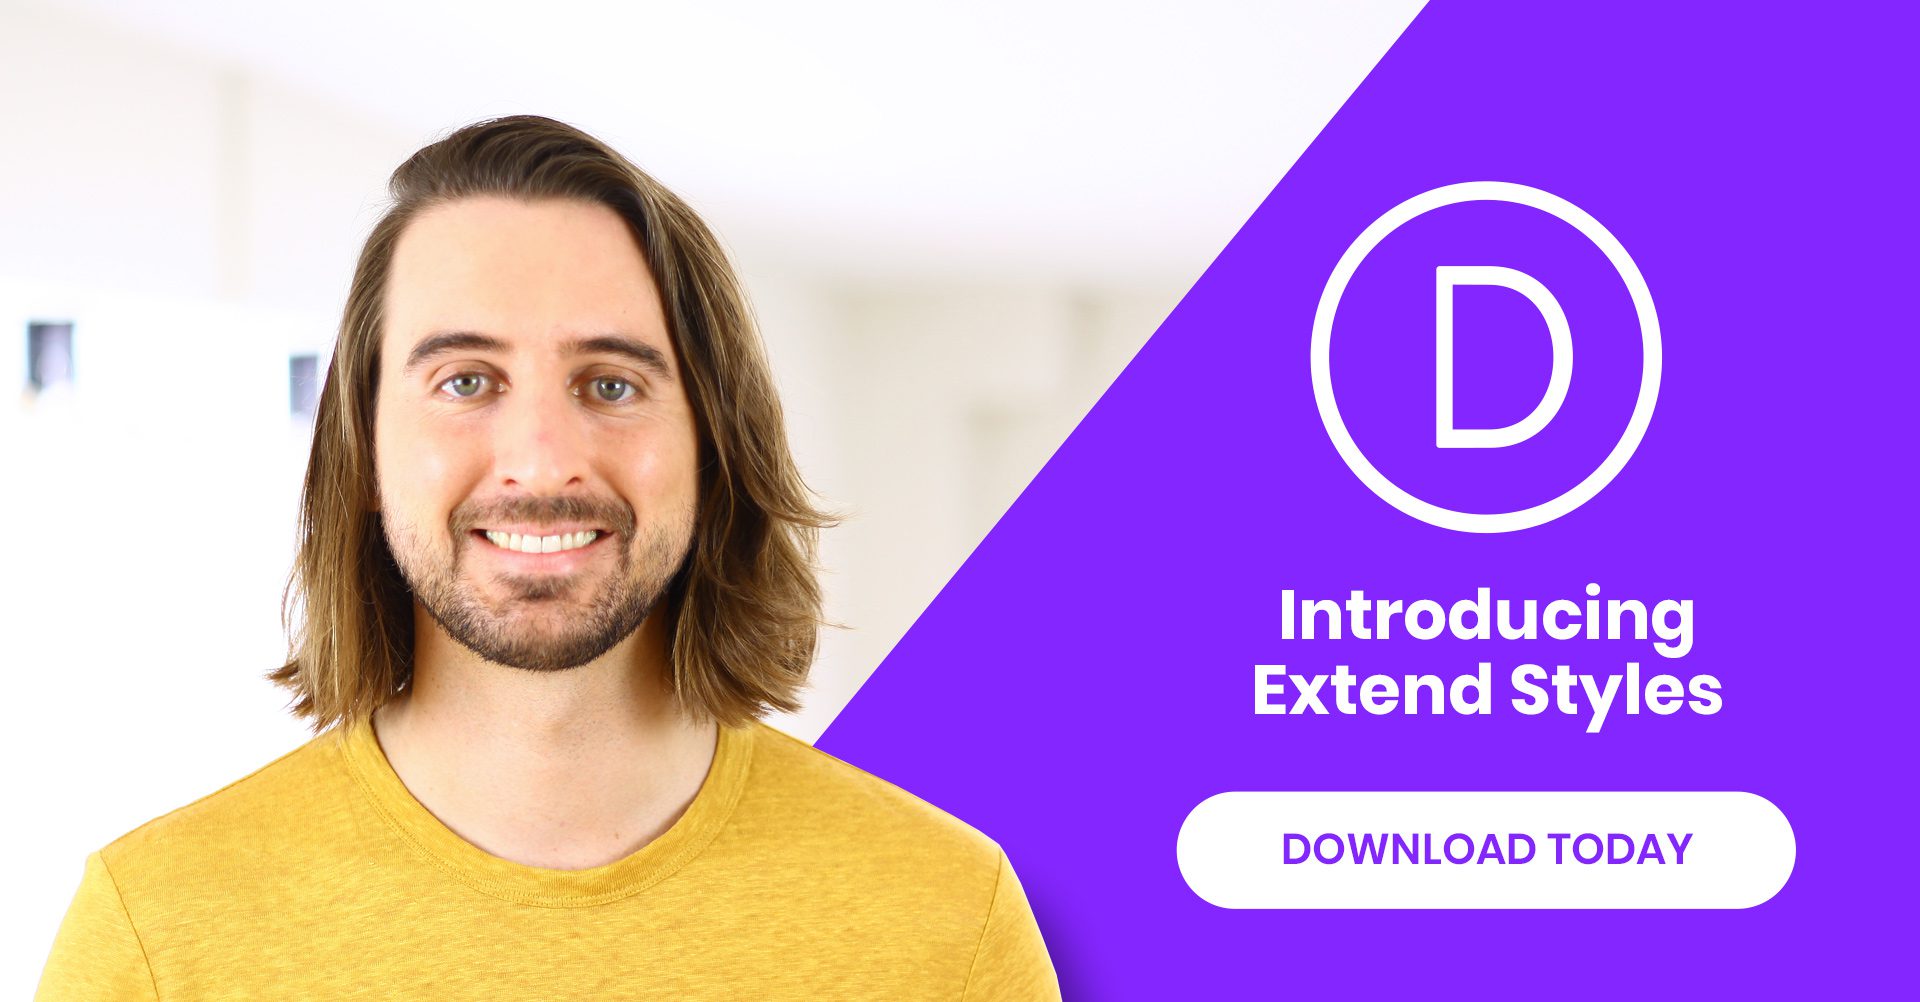 An Amazing New Way To Build Pages In Divi! Introducing Extend Styles